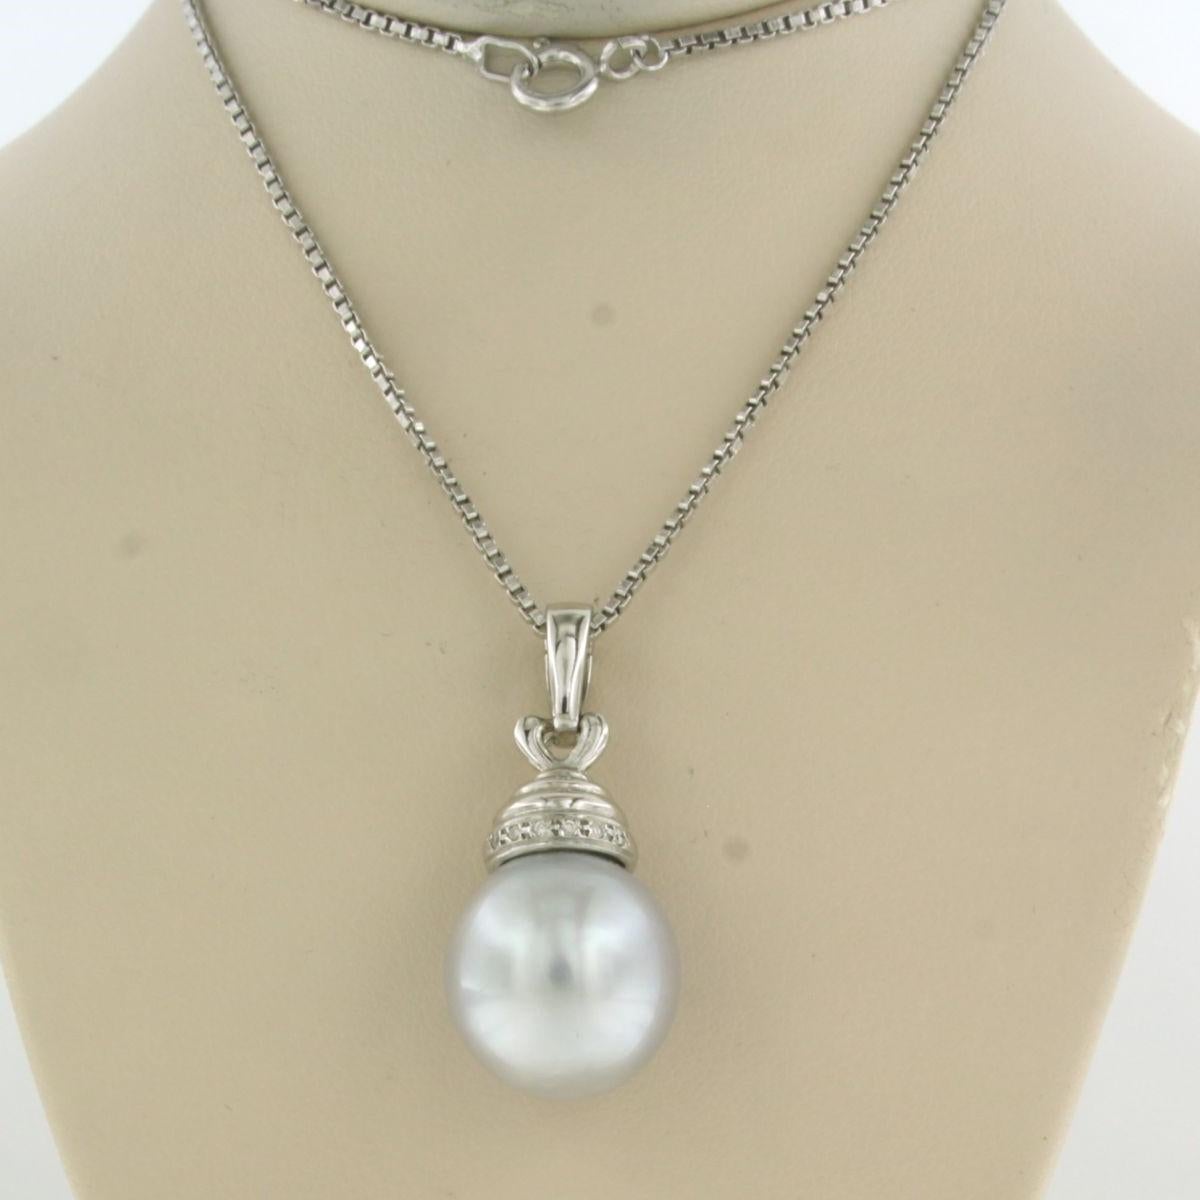 18k white gold necklace with pendant set with South Sea pearl and brilliant cut diamond. 0.03ct - F/G - VS/SI - 40 cm long

detailed description

the necklace is 40 cm long and 1.4 mm wide

Dimensions of the pendant are 3.0 cm long by 1.5 cm